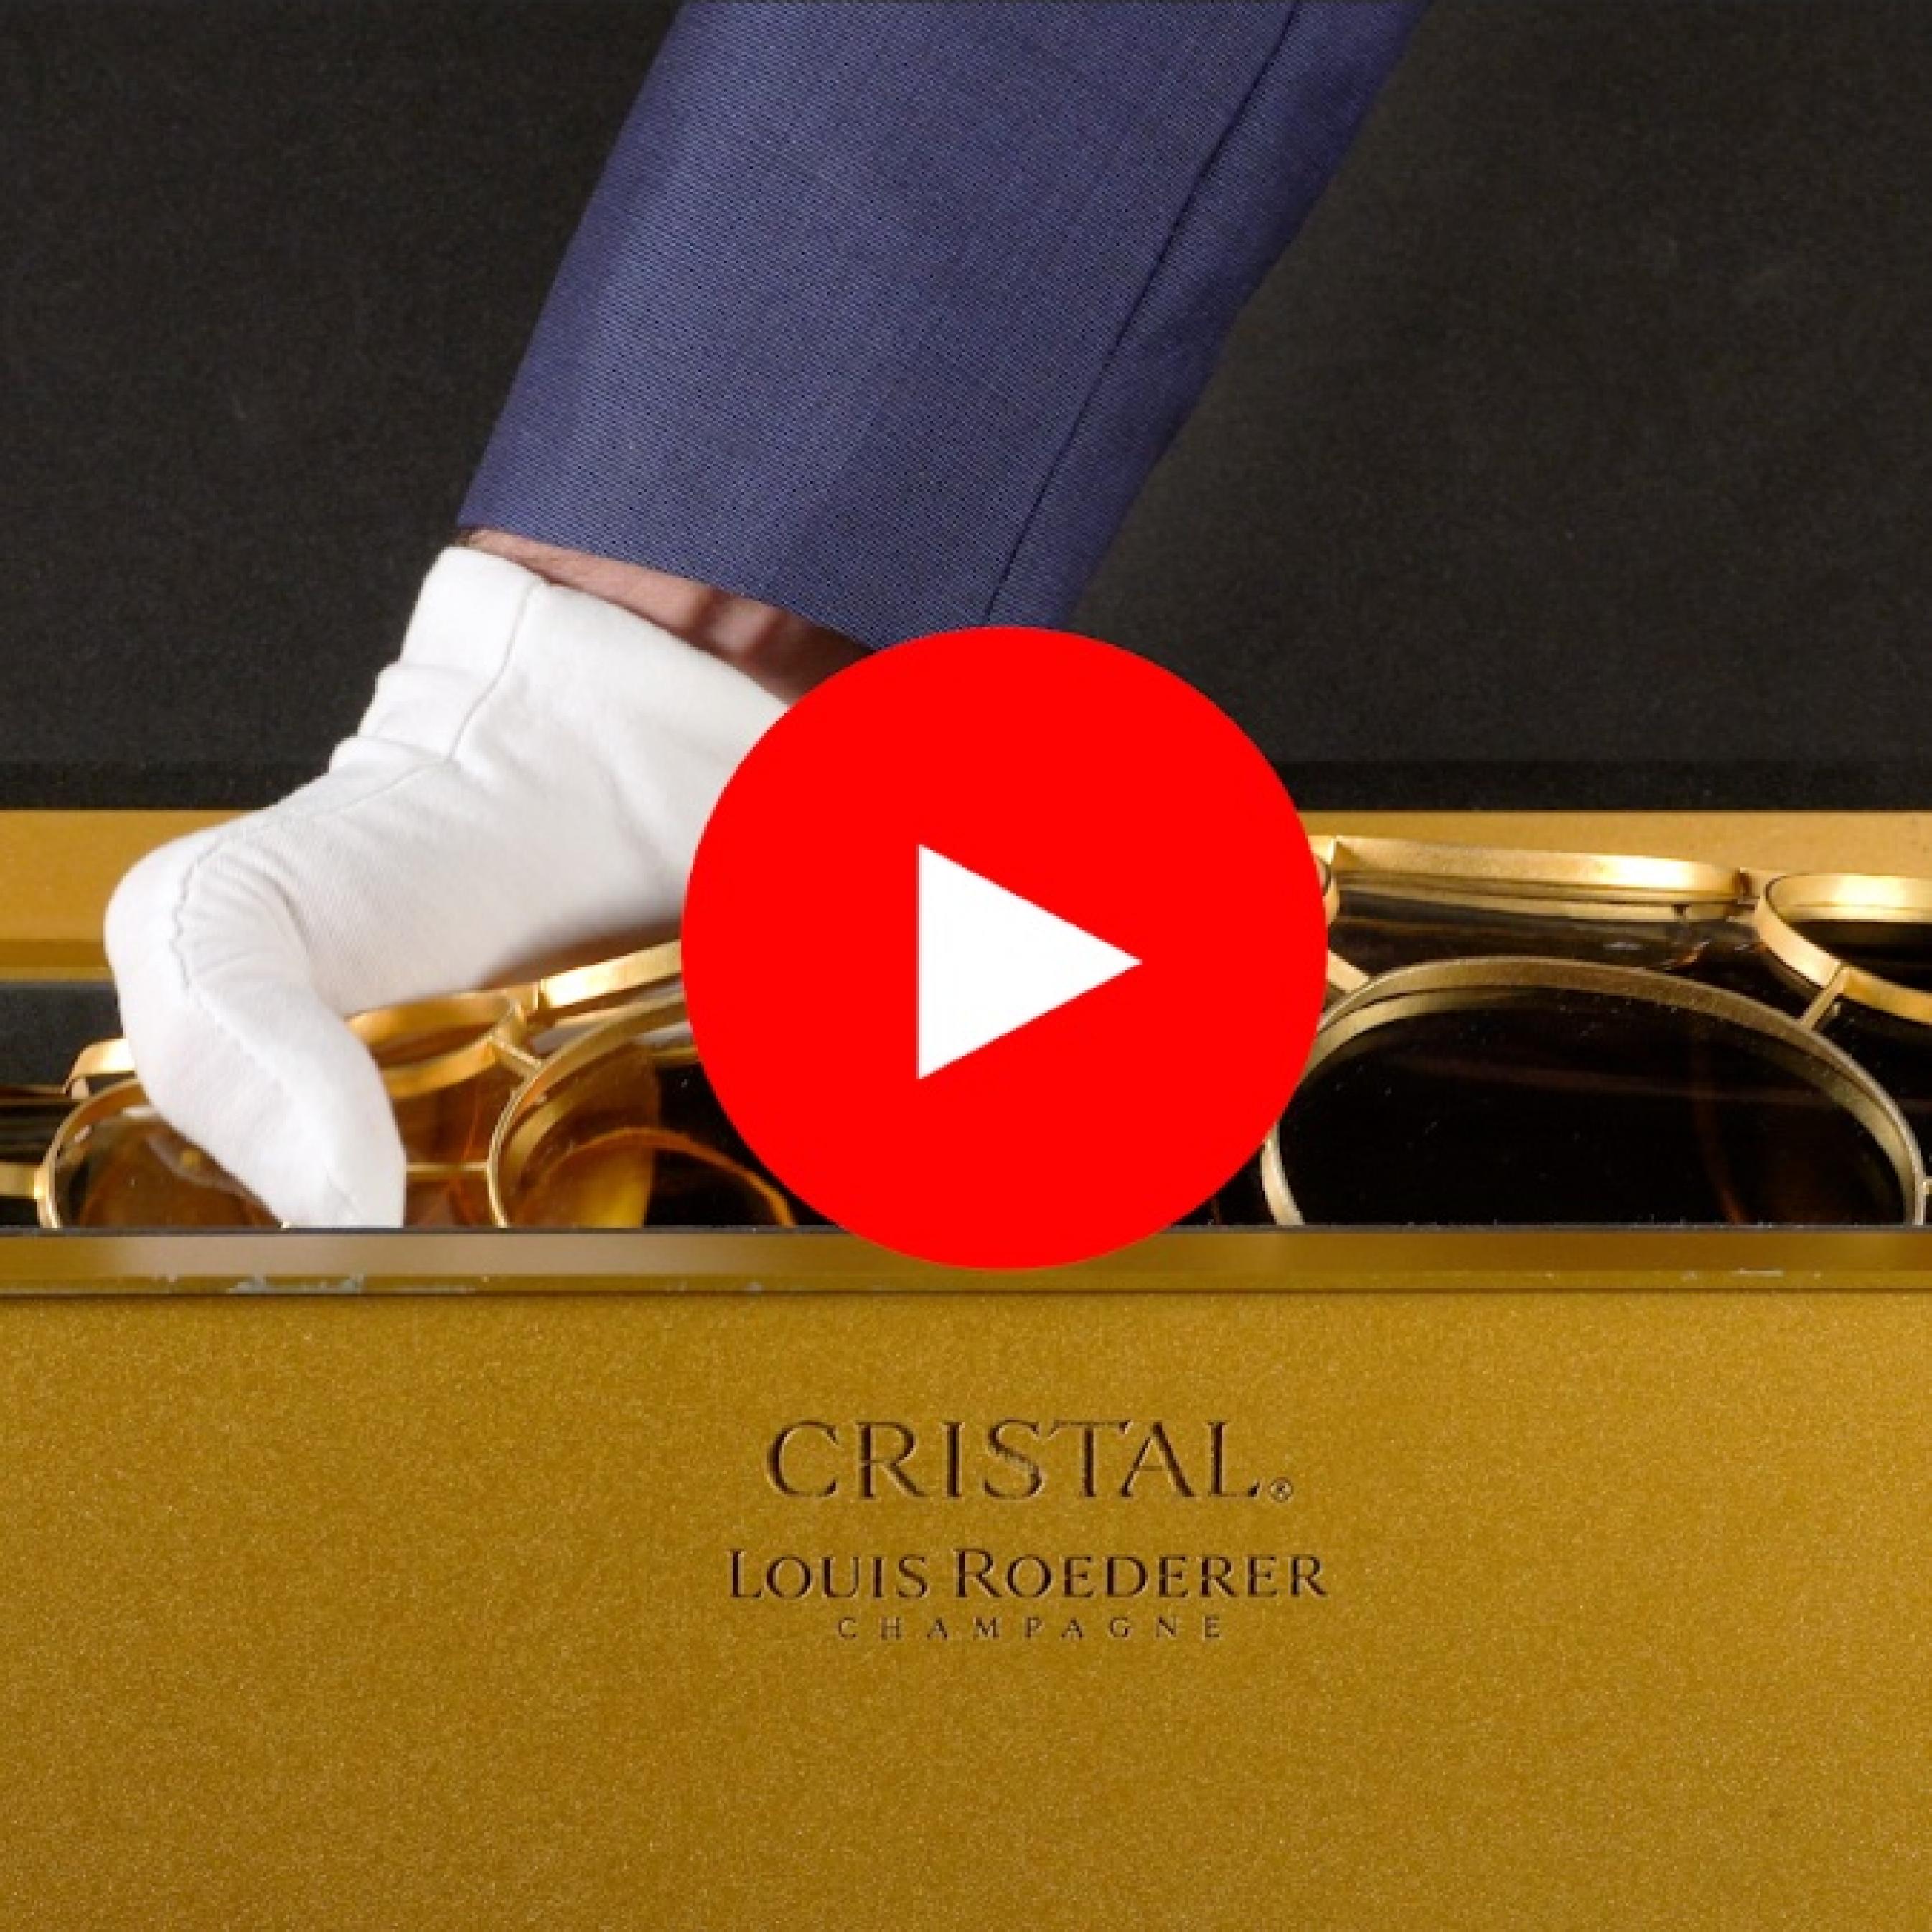 unboxing-fine-wine-louis-roederer-cristal-champagne-2002